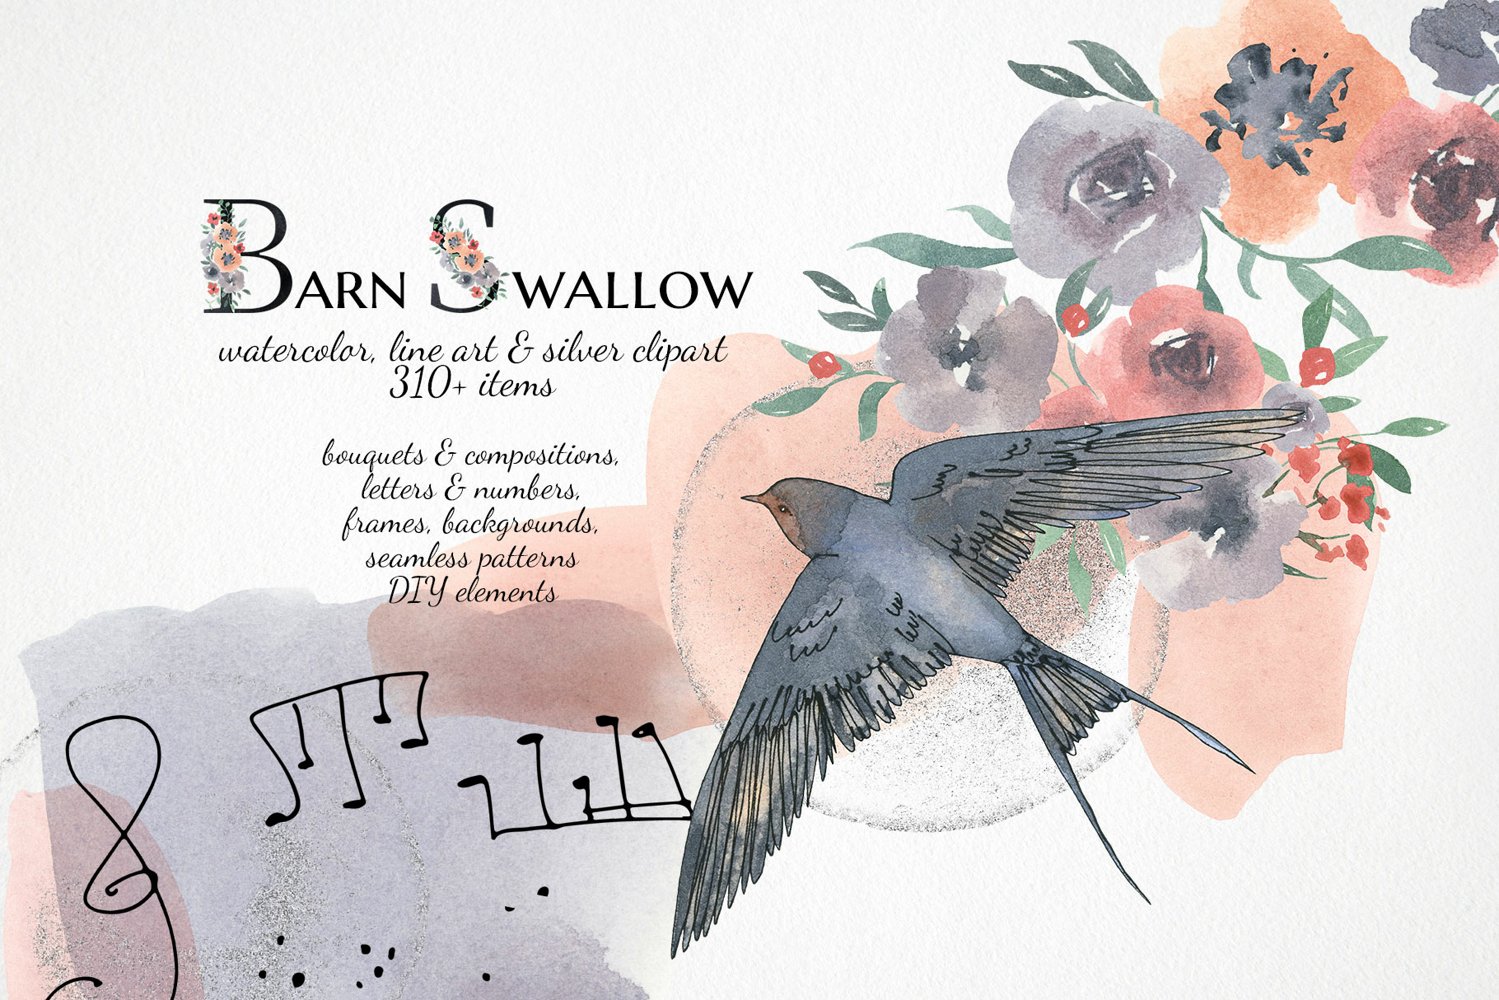 Cover image of Sarn swallow clipart.